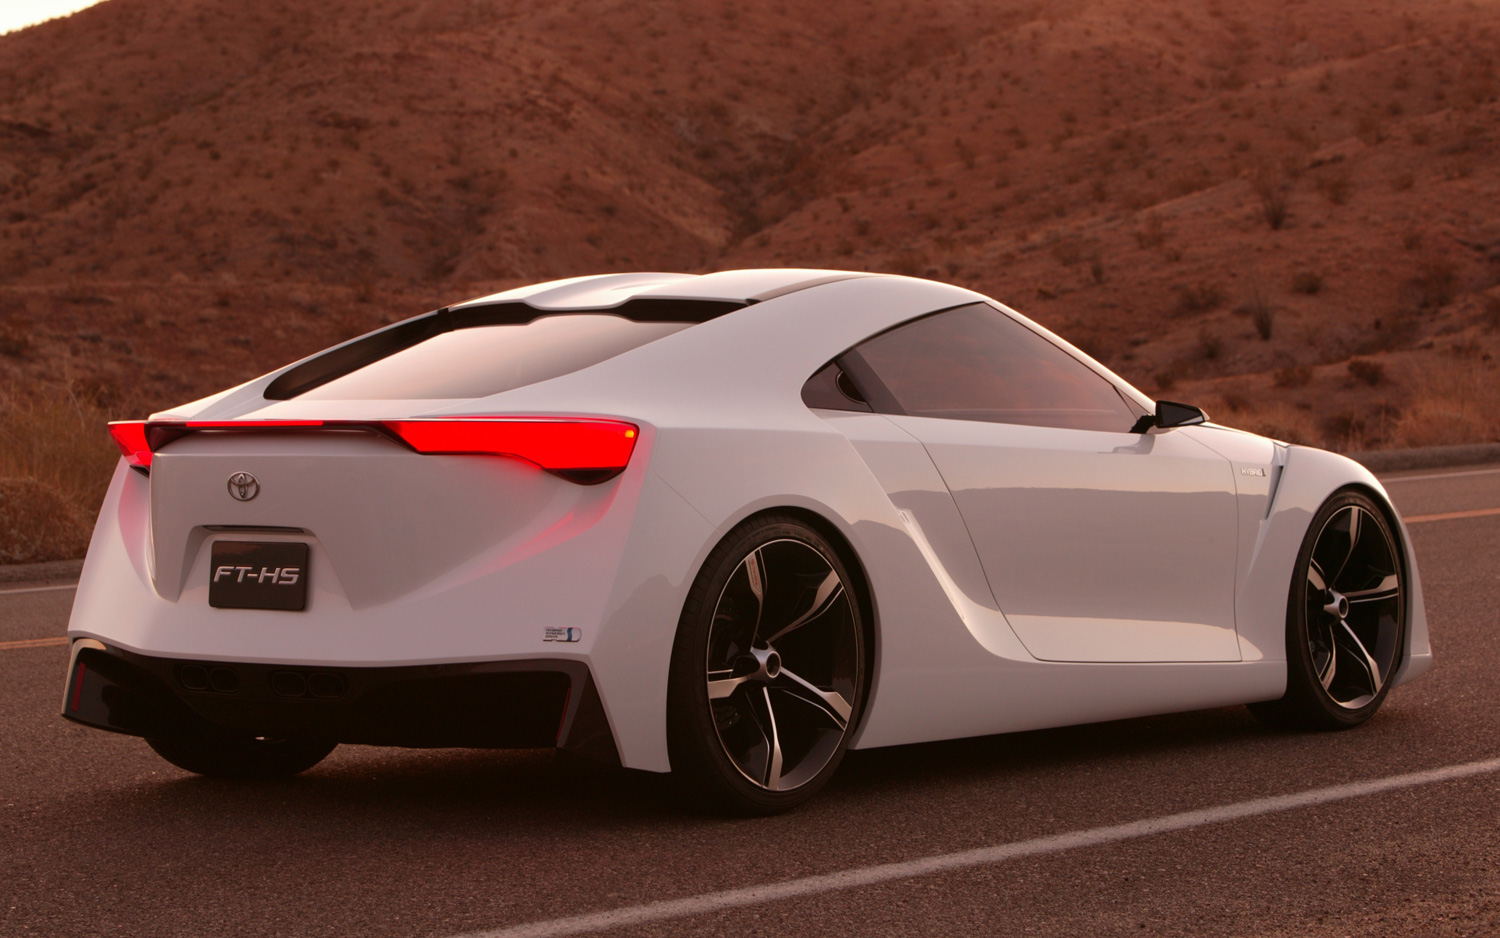 Toyota-FT-HS-concept-rear-side-view-lights-on.jpg